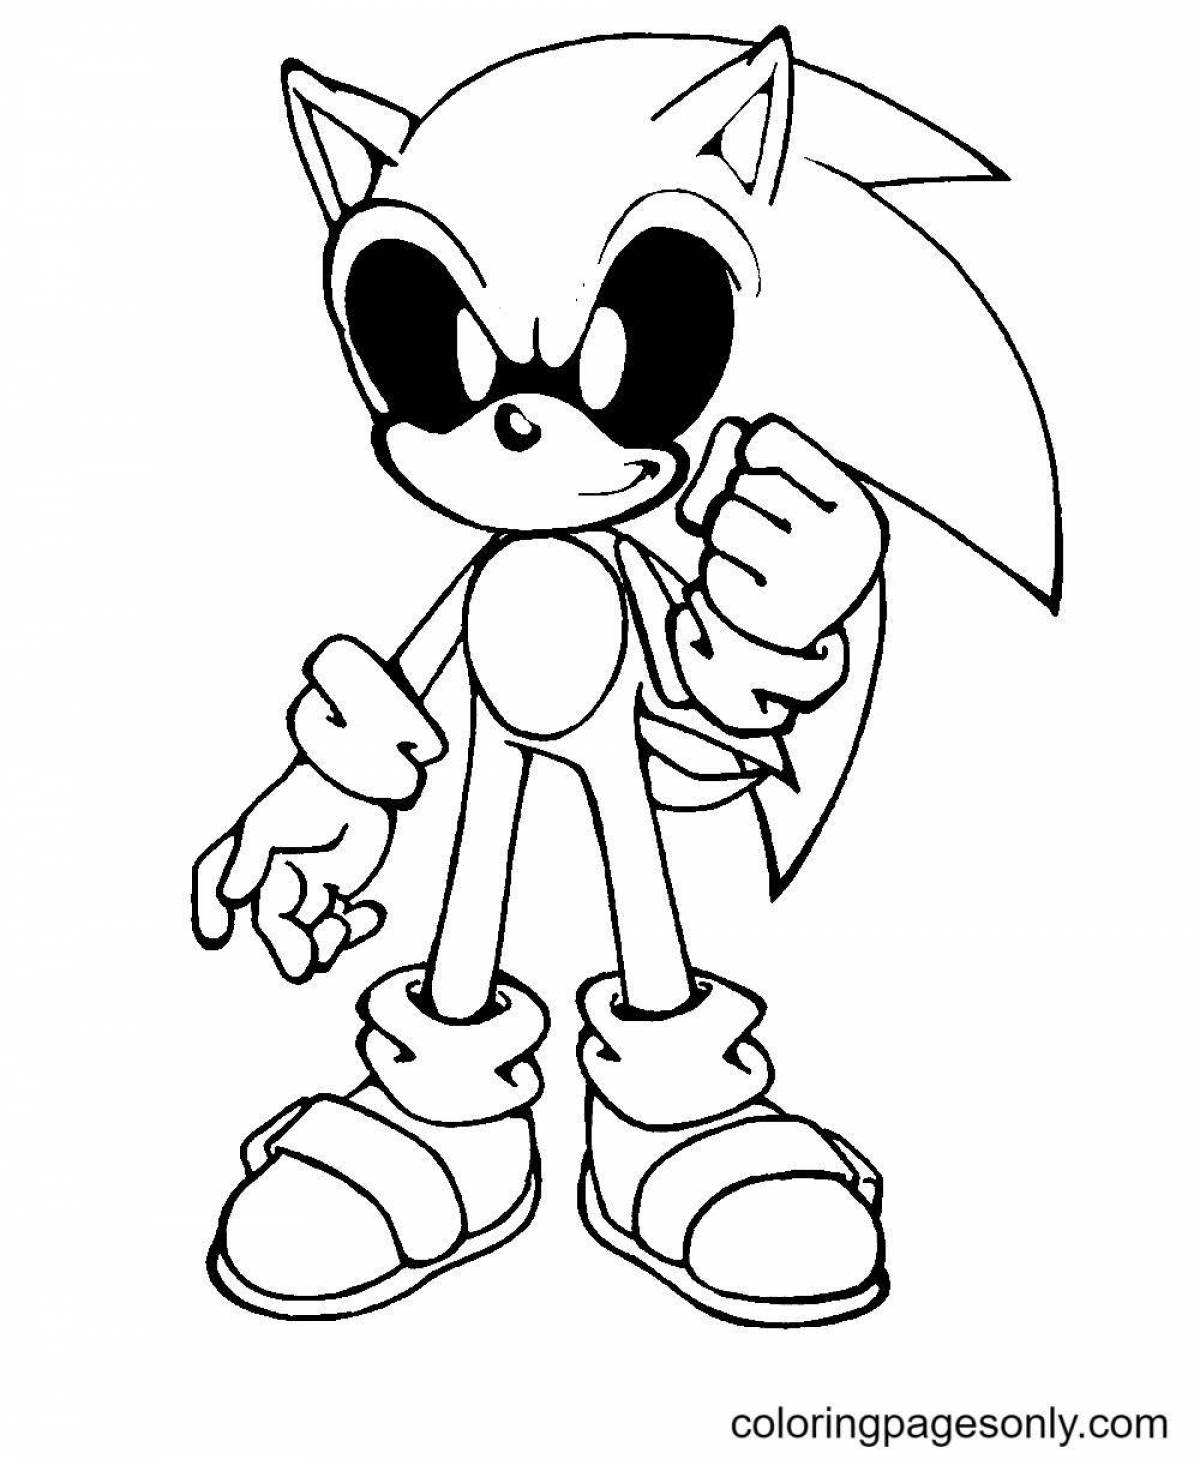 Sonic creepy coloring page